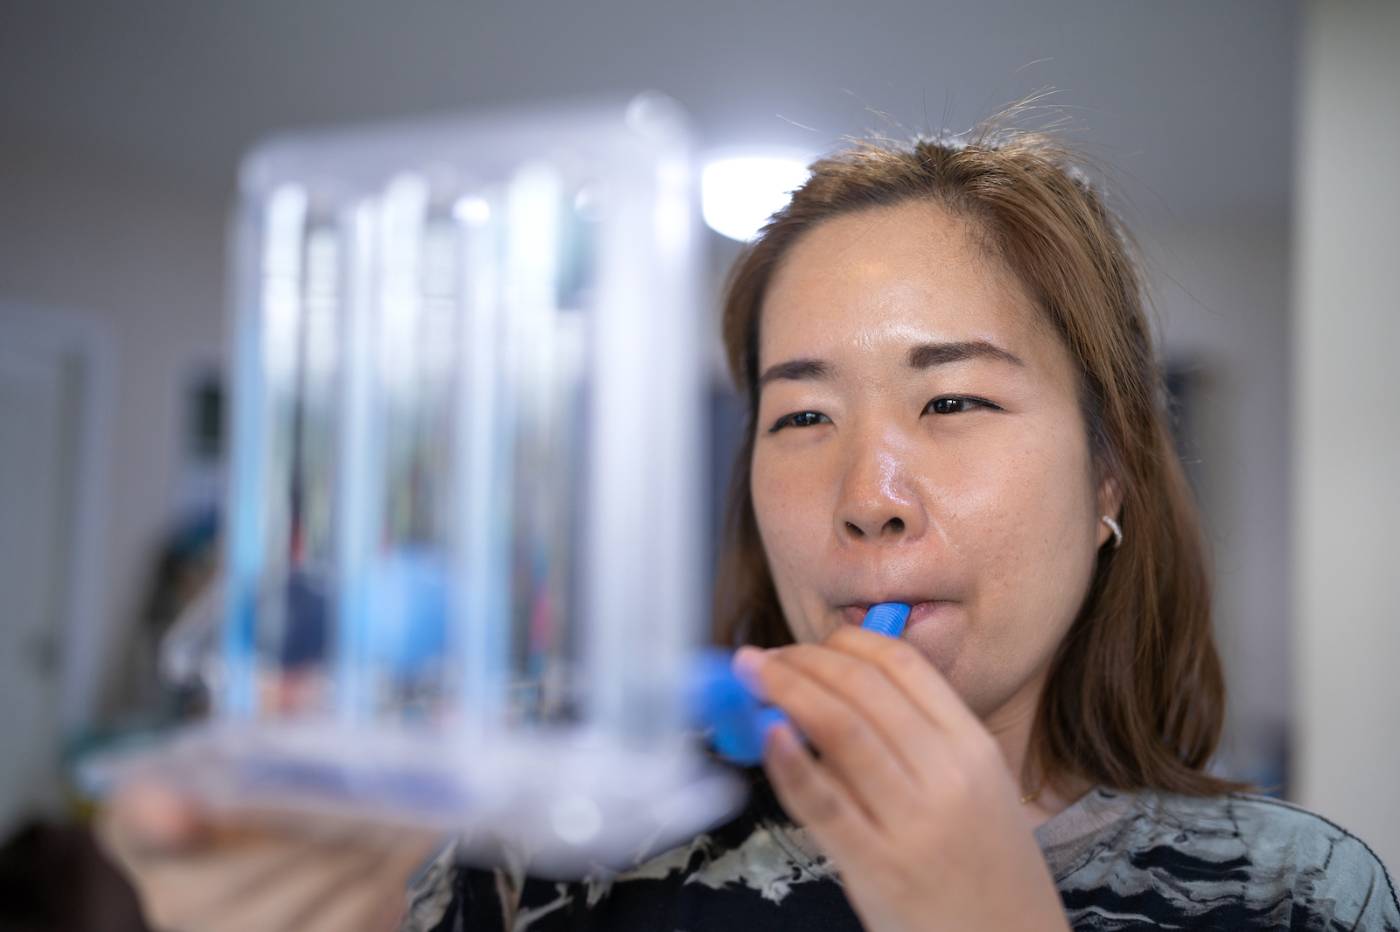 Asian female student demonstrates the use of a breathing device